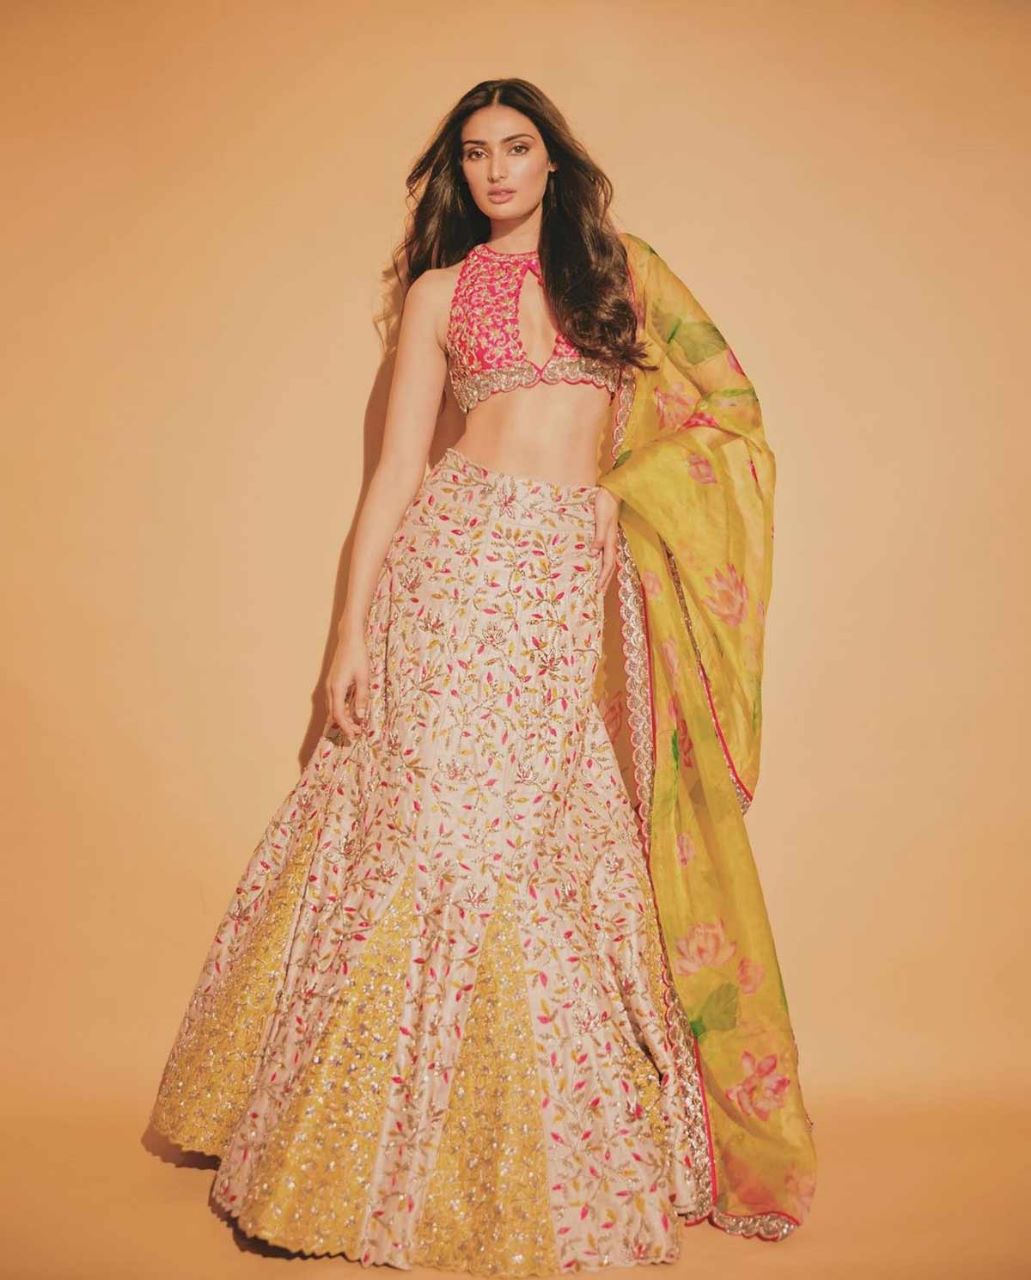 If you want to look stylish in a fish cut lehenga, keep it like a Bollywood actress.